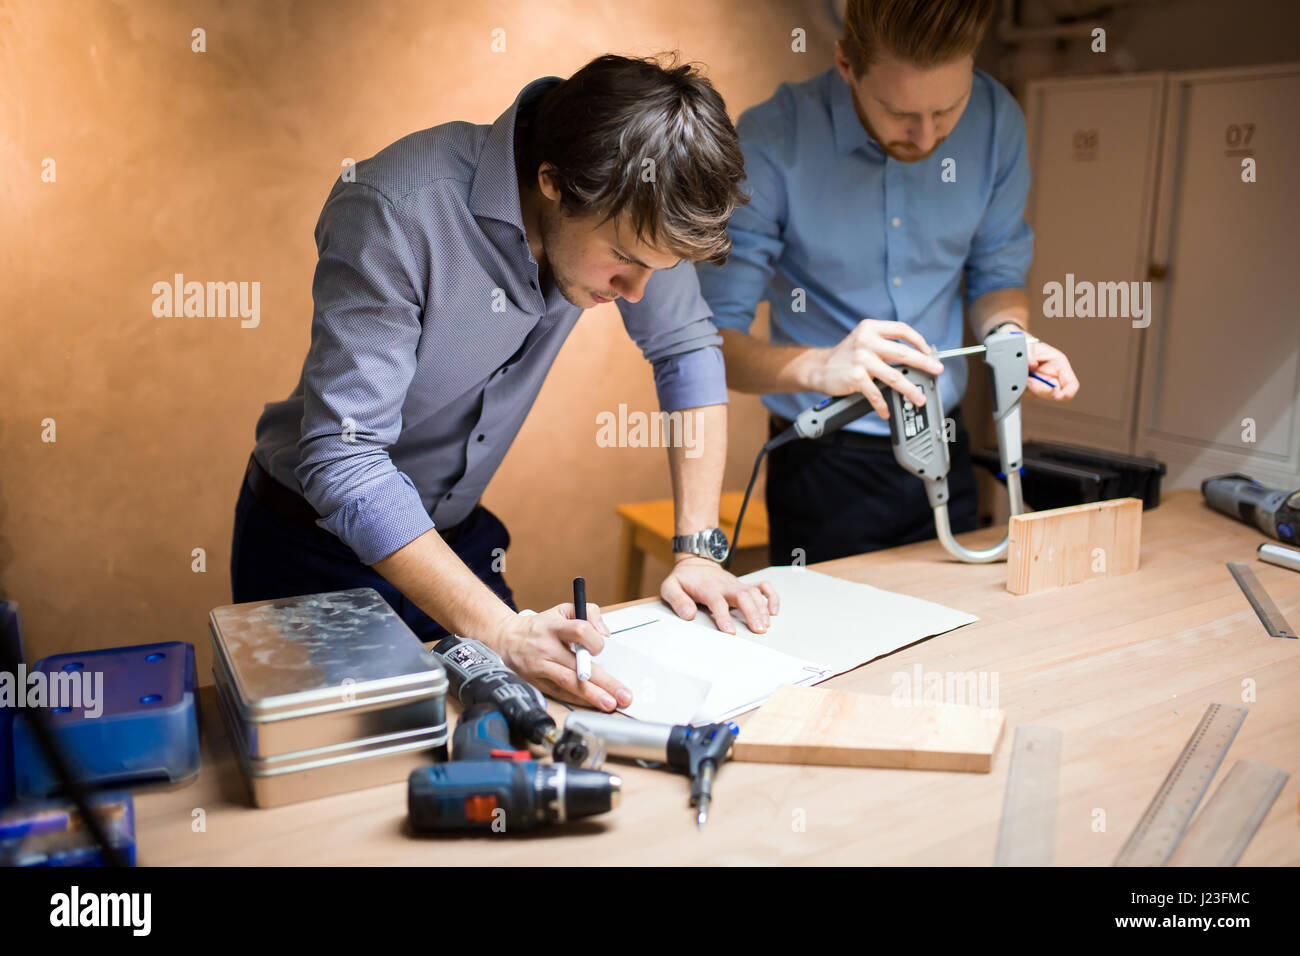 Two designers working together in workshop with precision tools Stock Photo